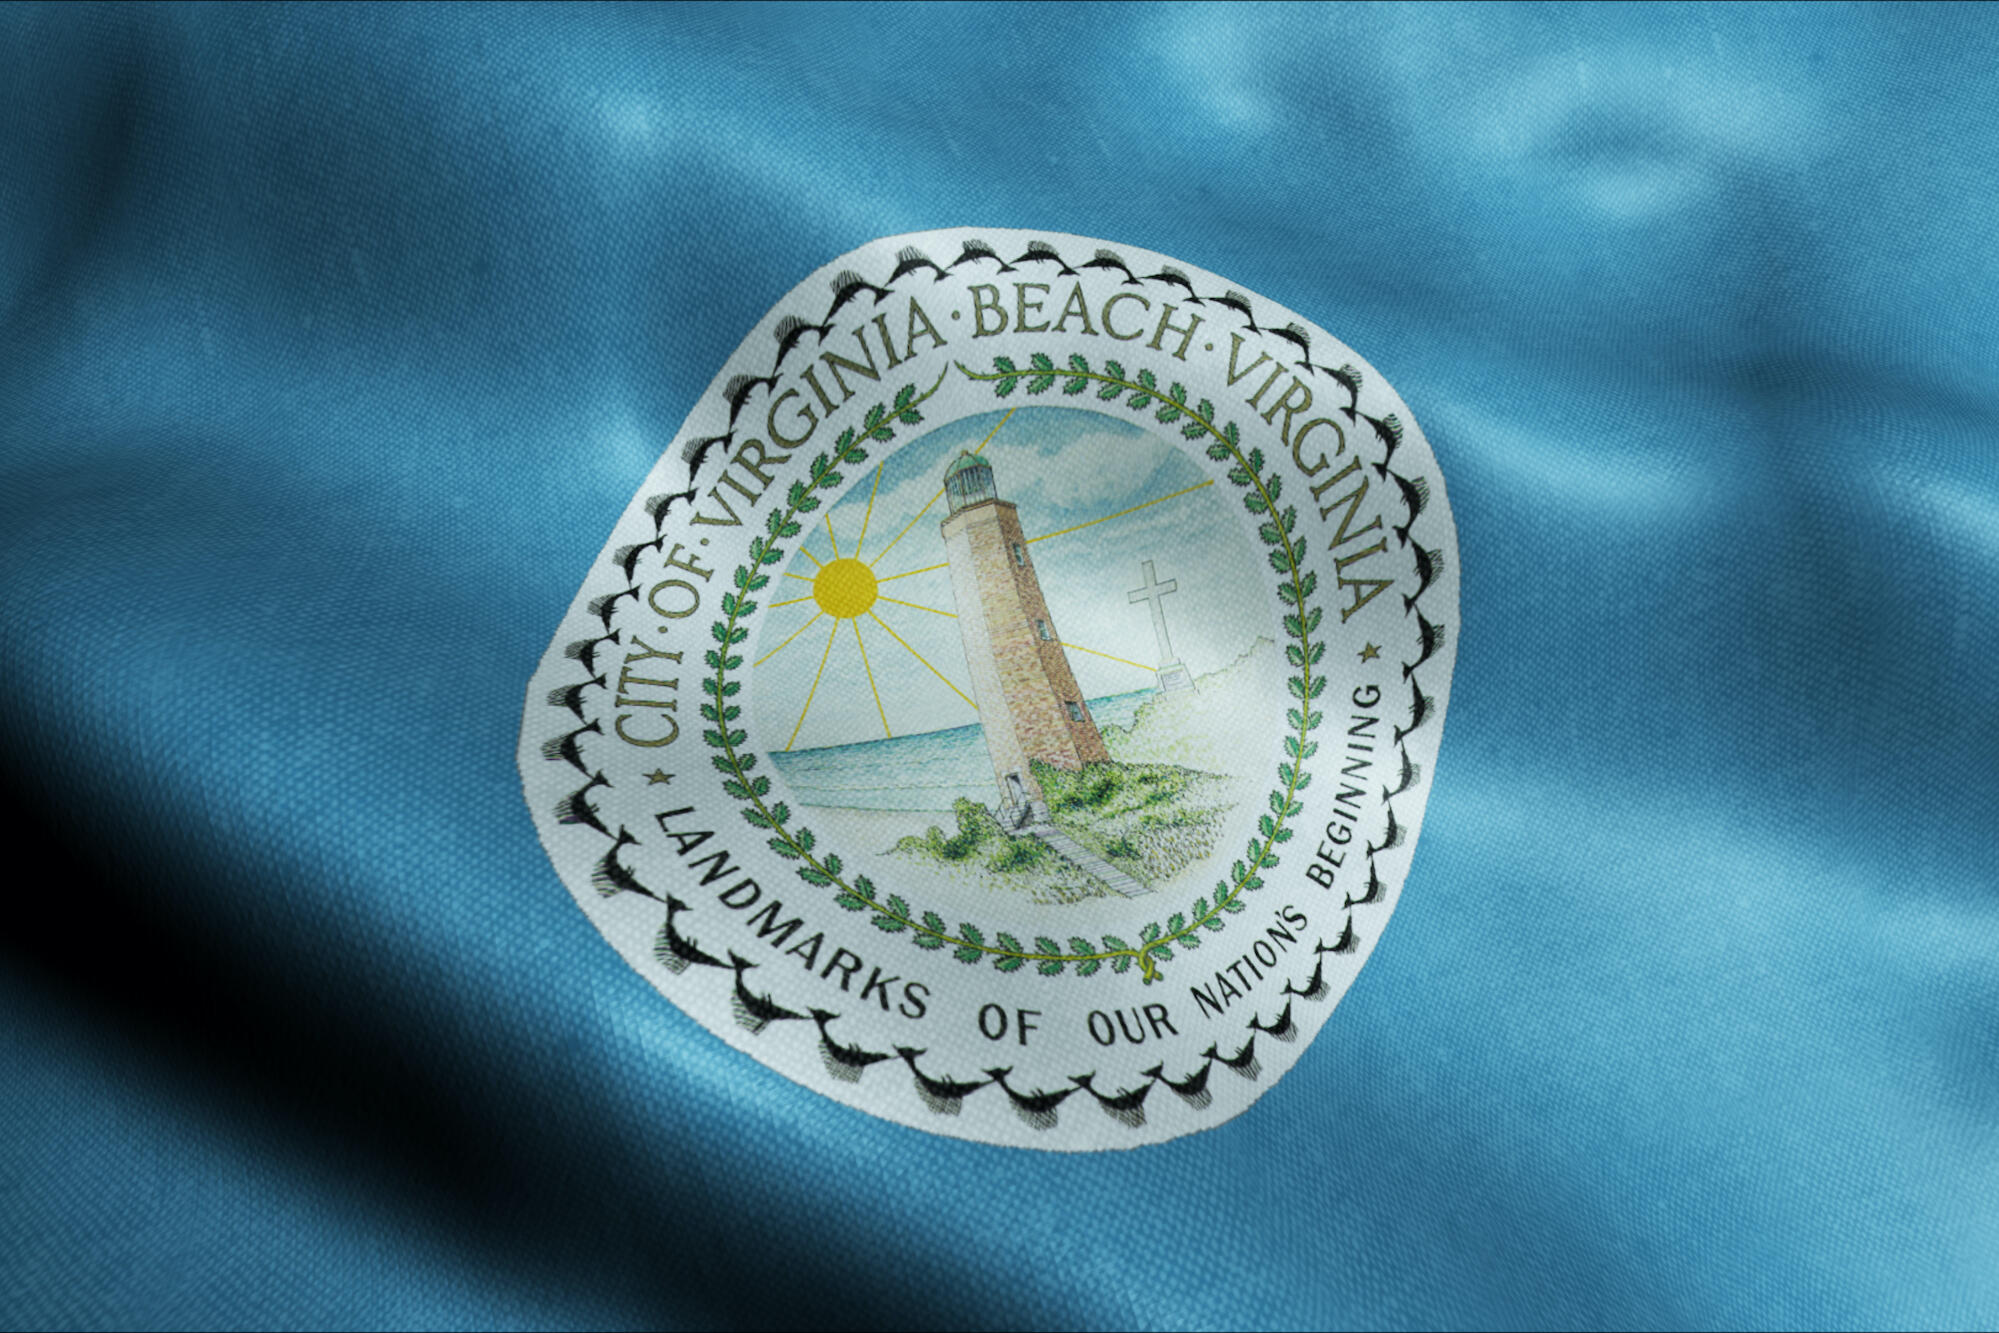 Close-up image of the Virginia Beach seal in the middle of the city's flag.